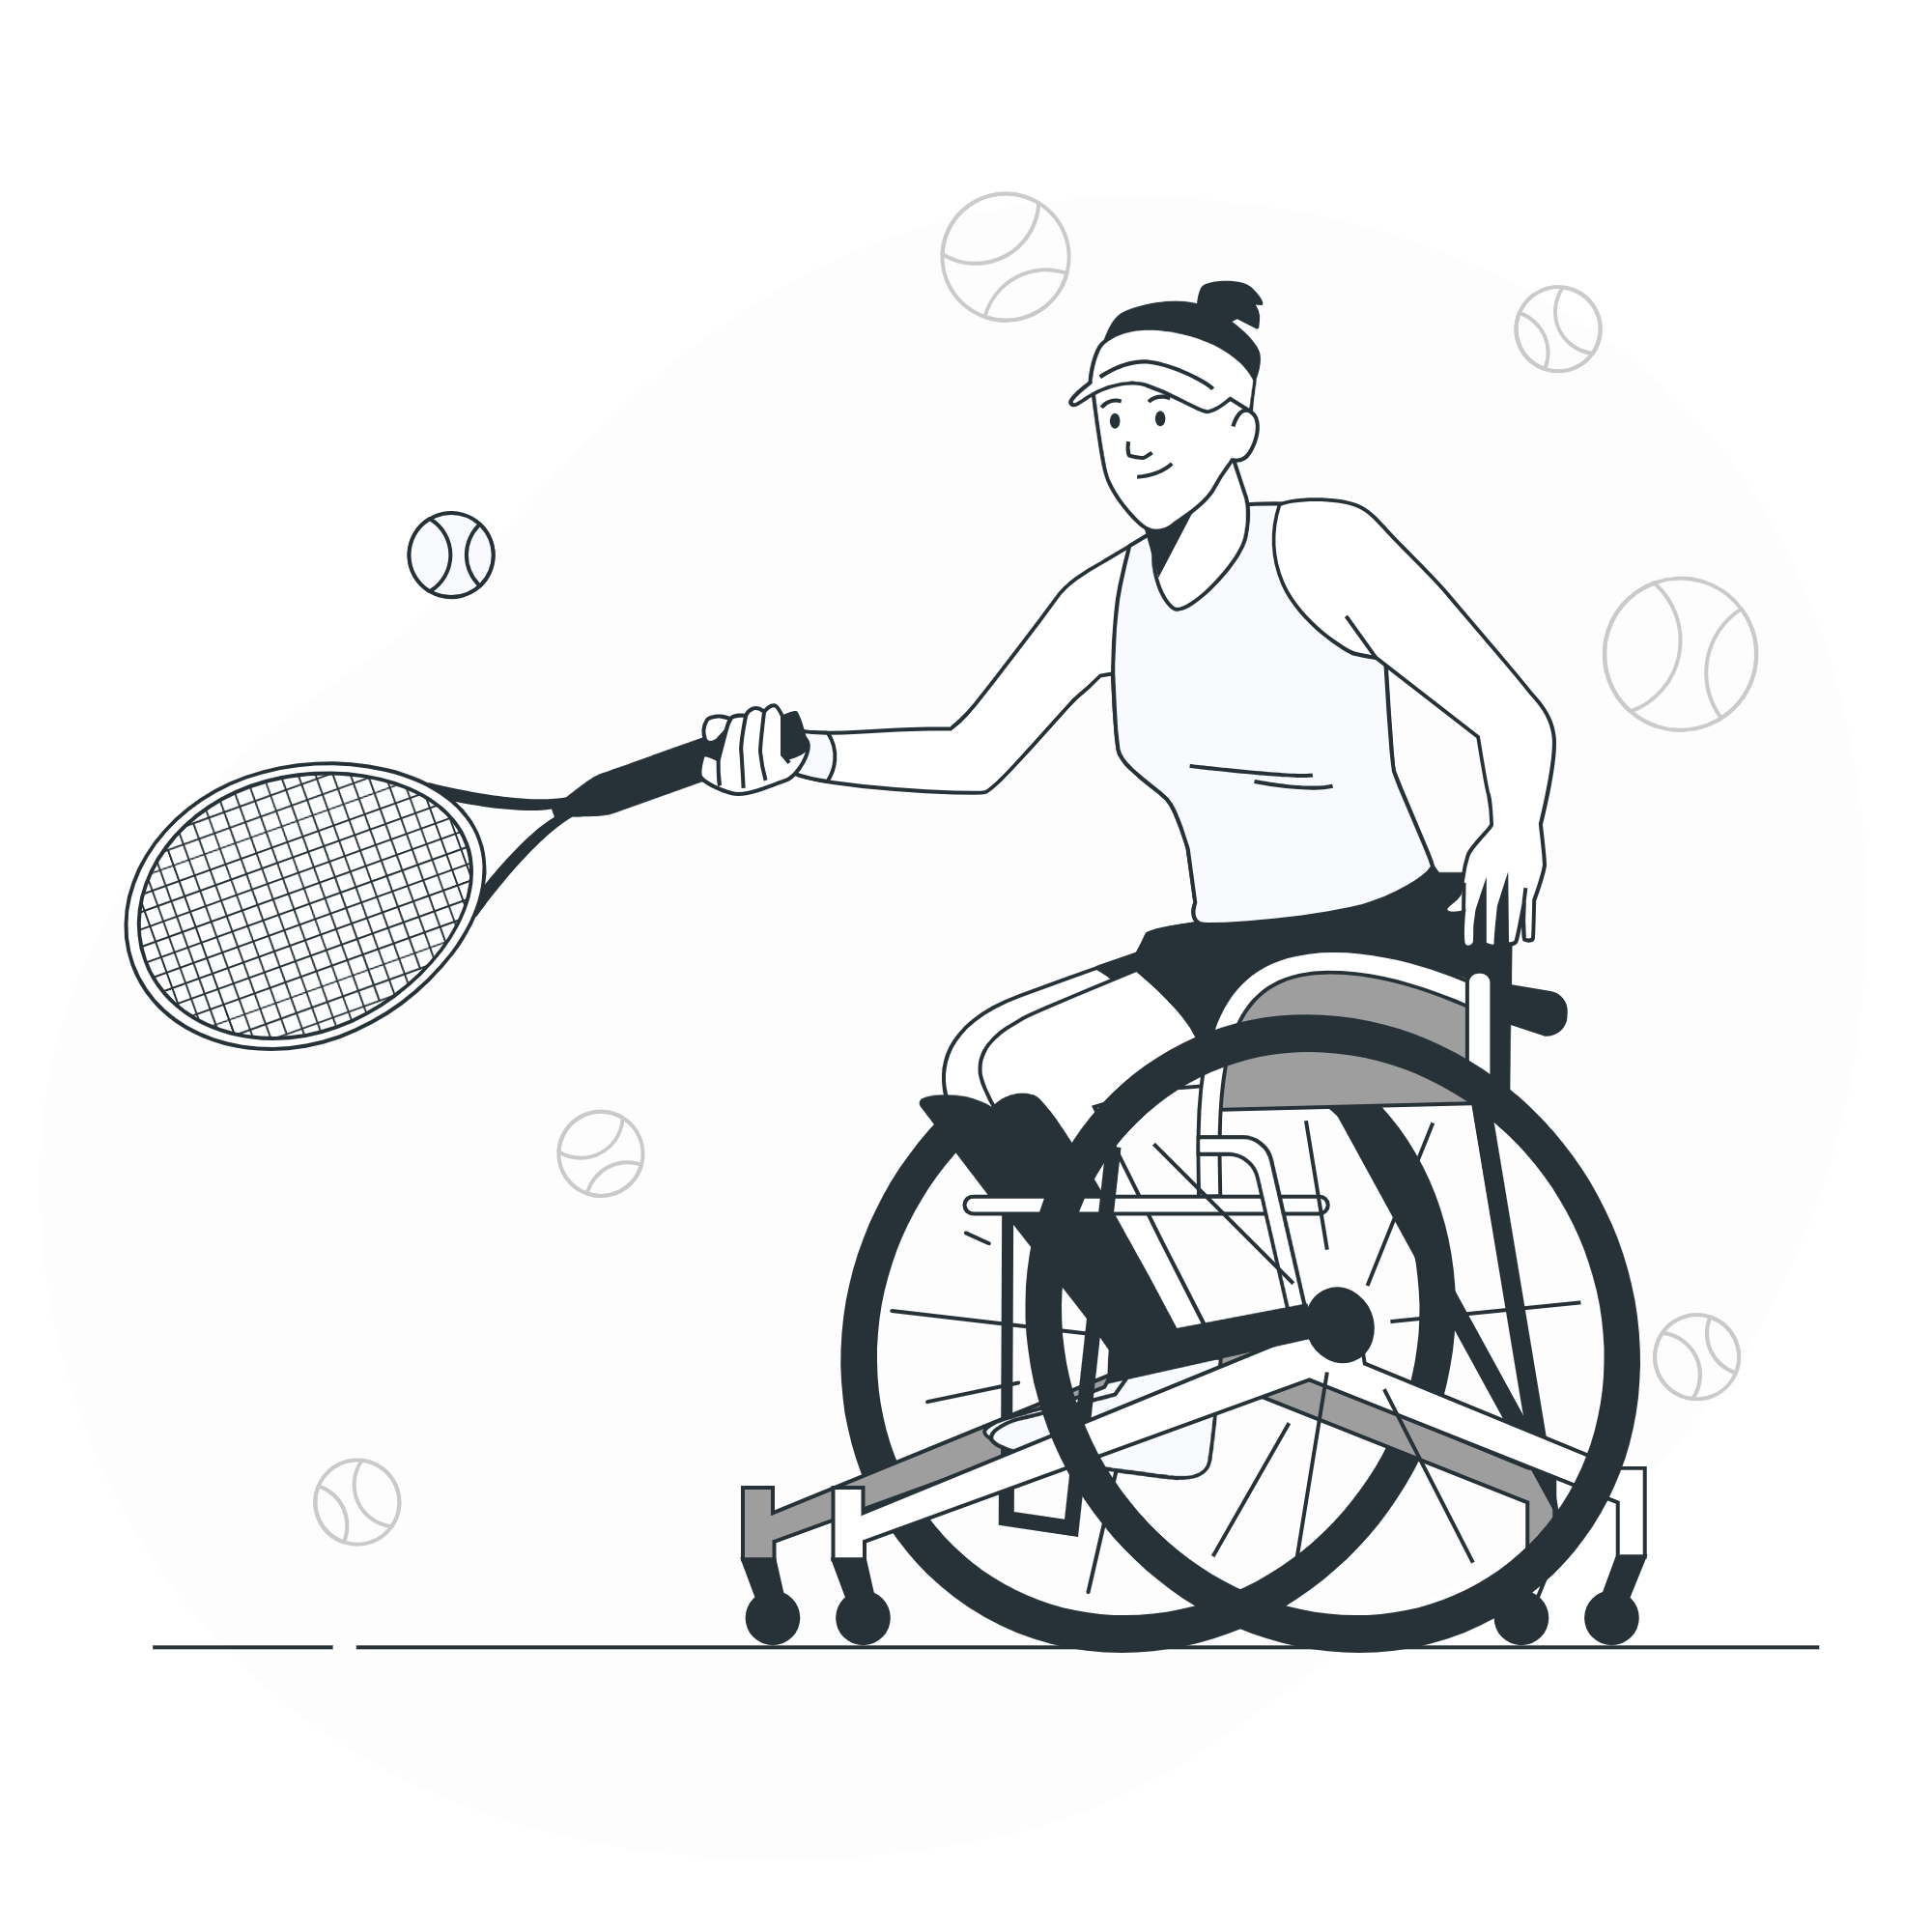 Image showcasing physical disability service: A person or an individual with physical disability playing tennis, promoting accessibility and inclusivity.